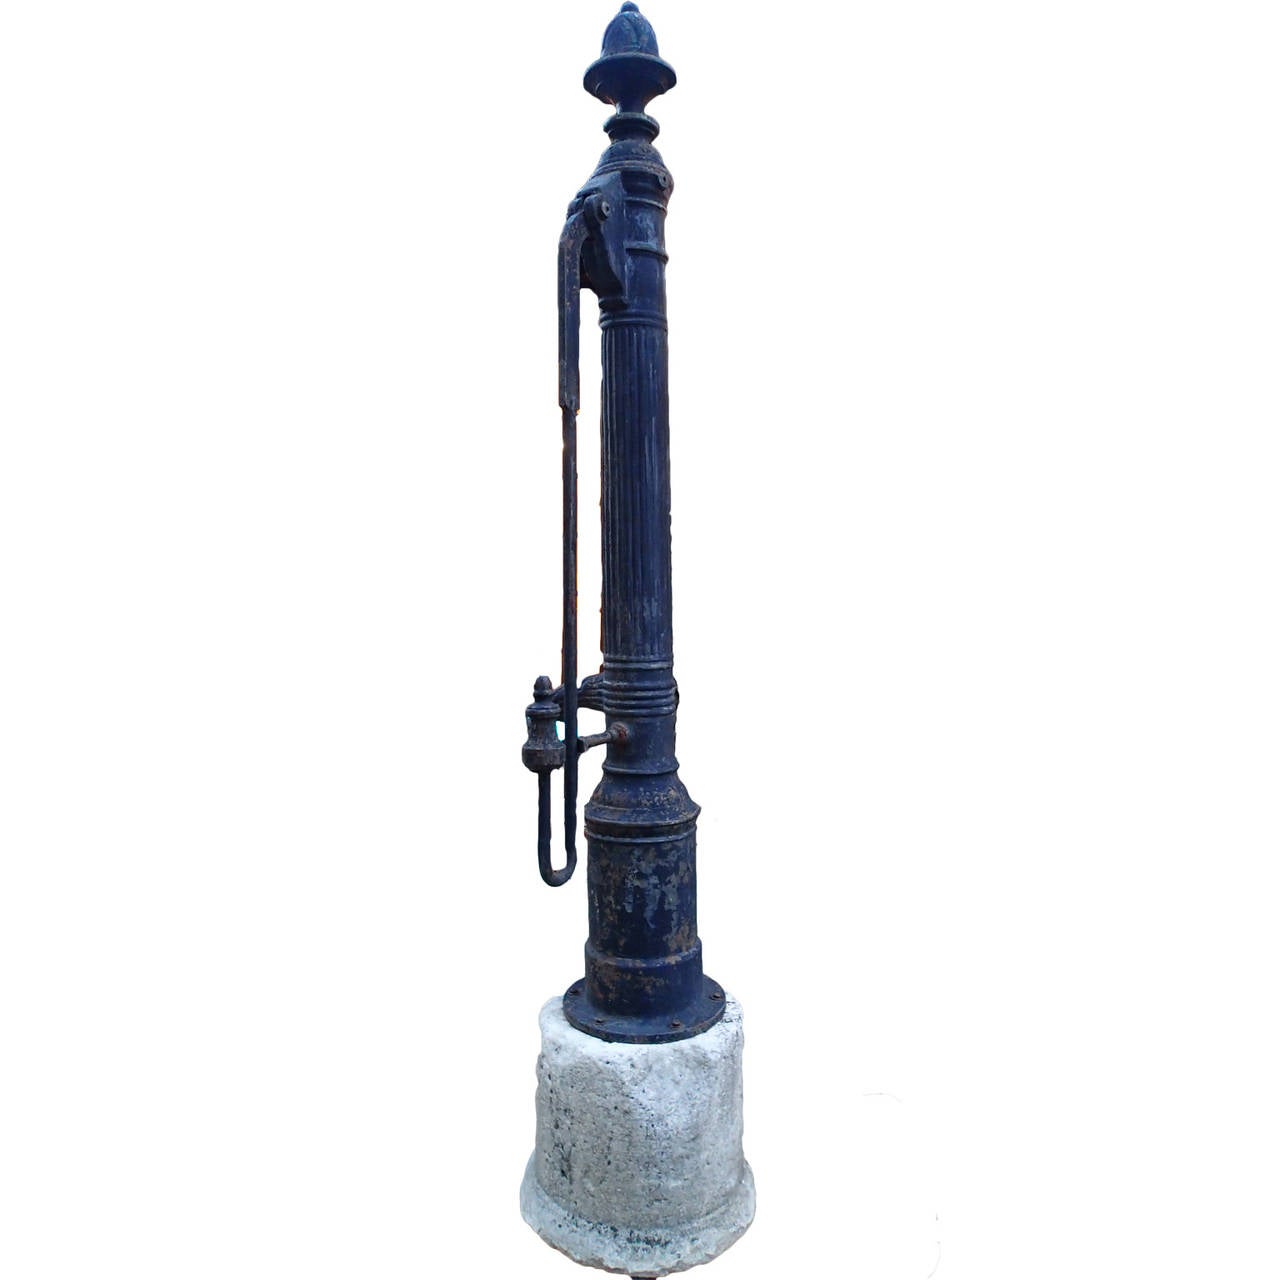 The beautiful Cast Iron Village water pump from France sits on a 19th C. Limestone Pedestal. A unique piece that is difficult to come across in this size.
The total Height of this water pump with the pedestal is 110.25